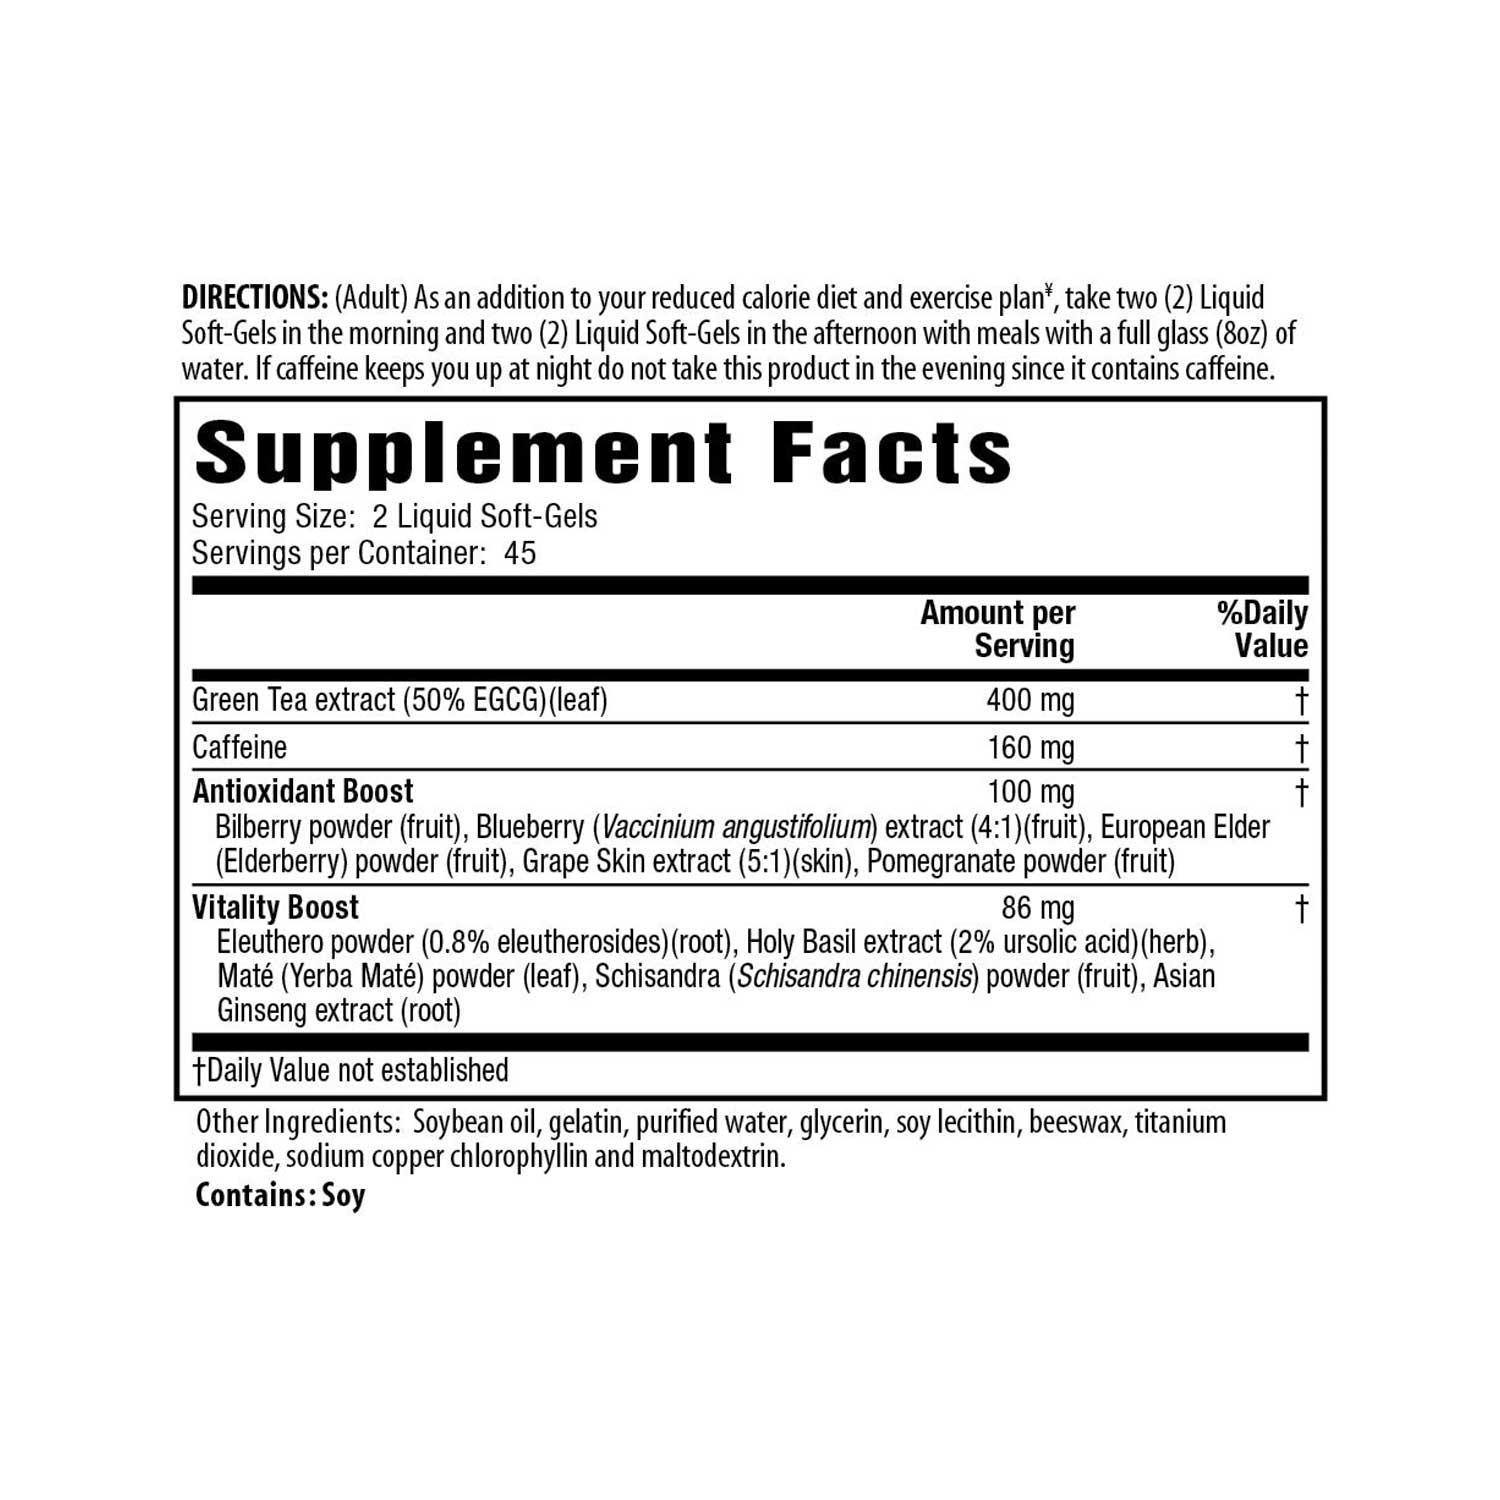 Applied Nutrition Green Tea Weight Loss Supplement, 90 Capsules - image 2 of 2